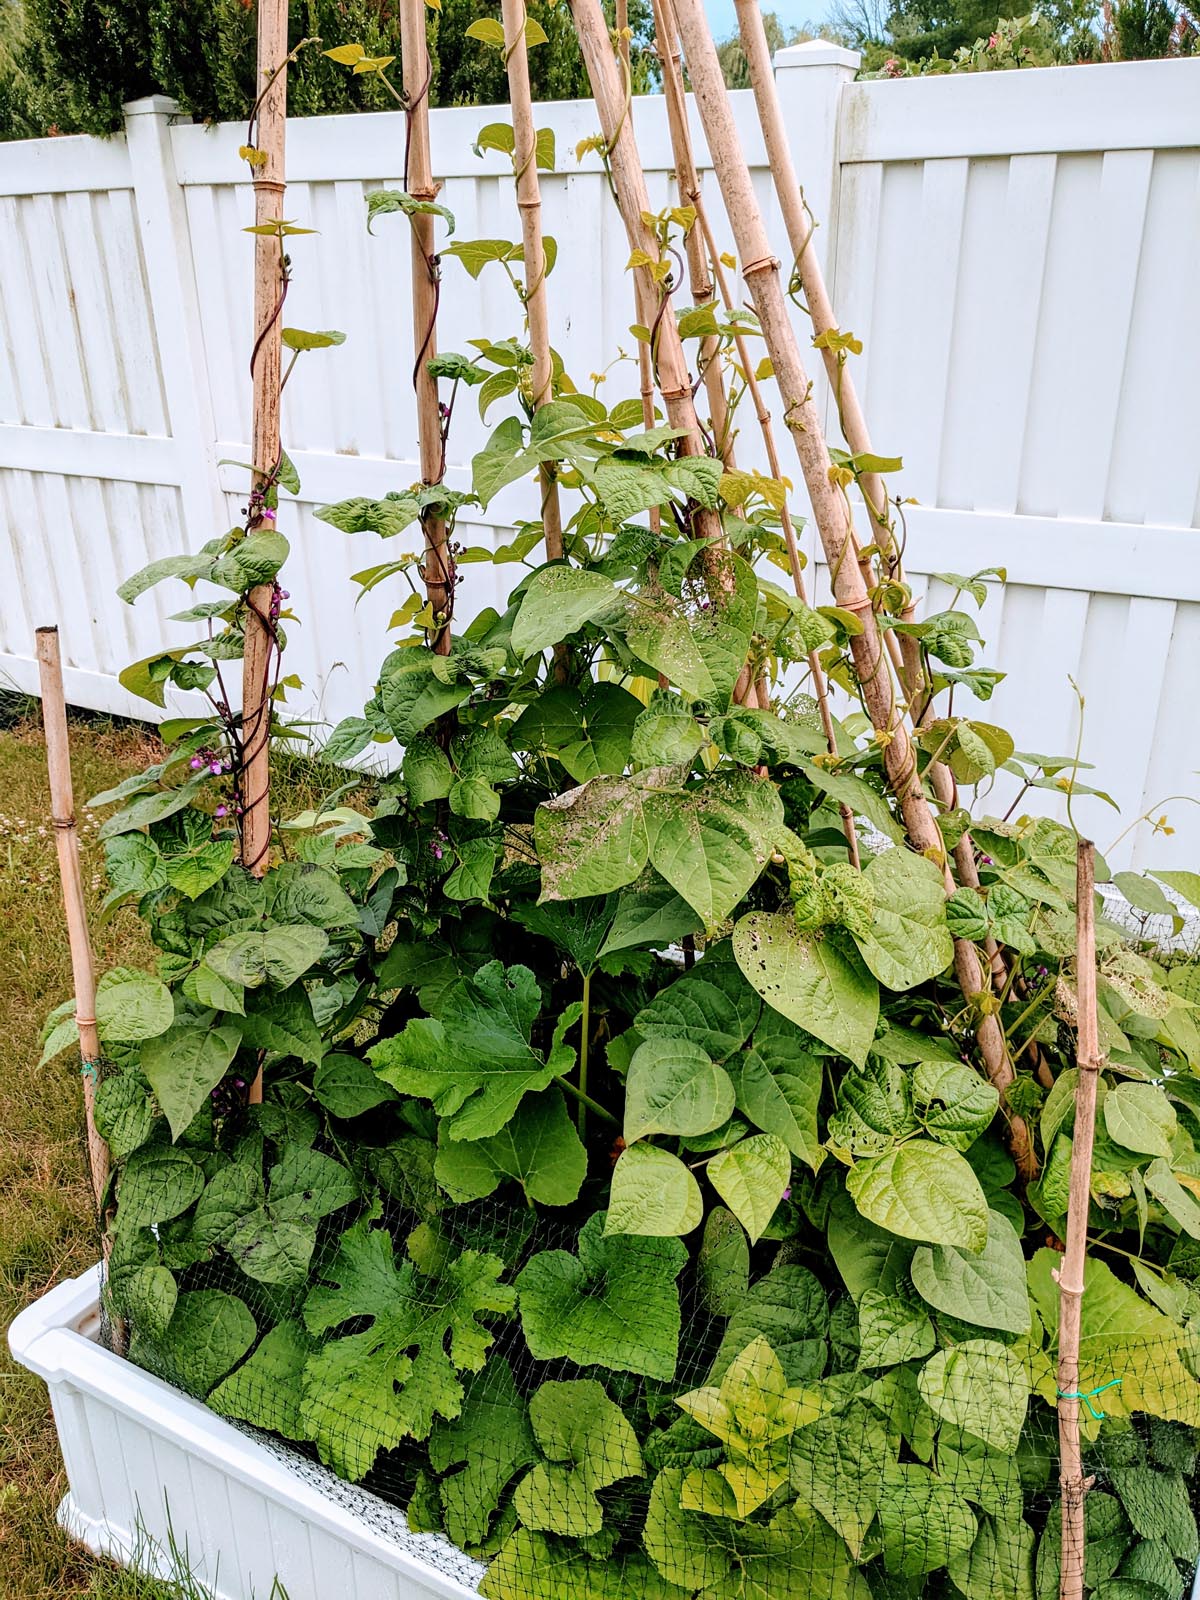 Pole Bean Teepee Trellis with bamboo poles by a white fence